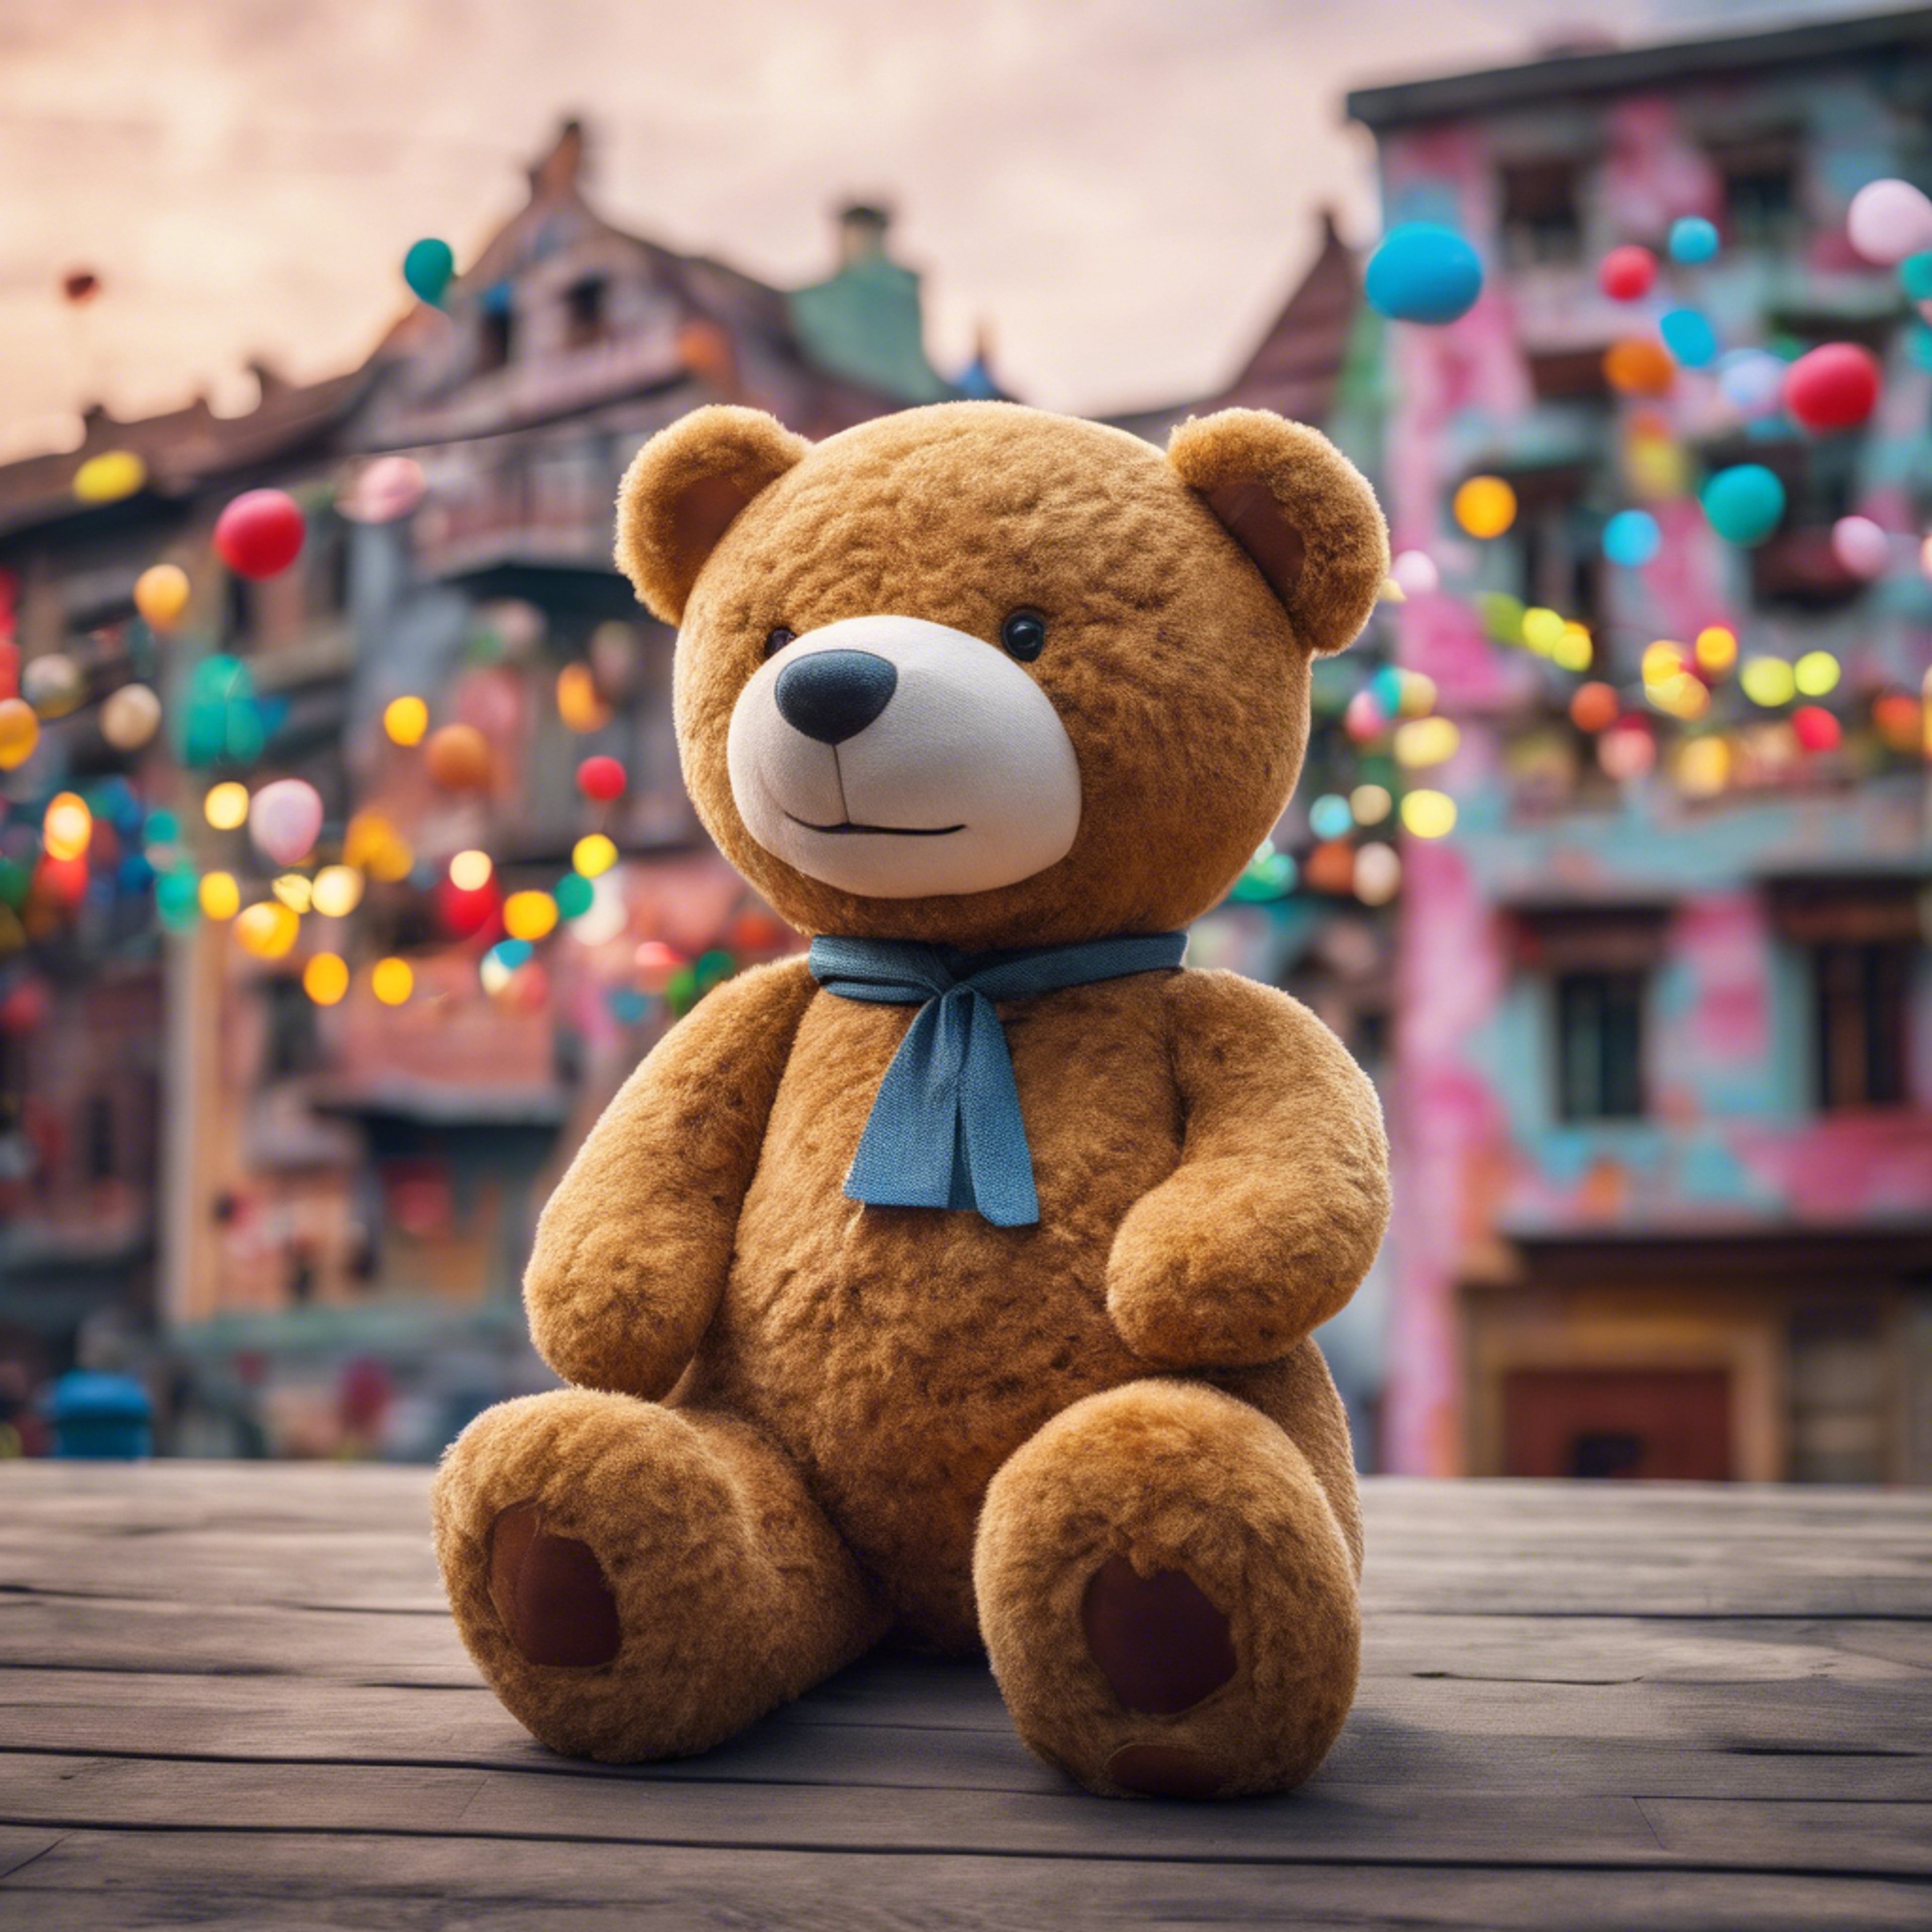 A giant teddy bear watching over a playful and colorful dream town. Wallpaper[2720b550e885450daa82]